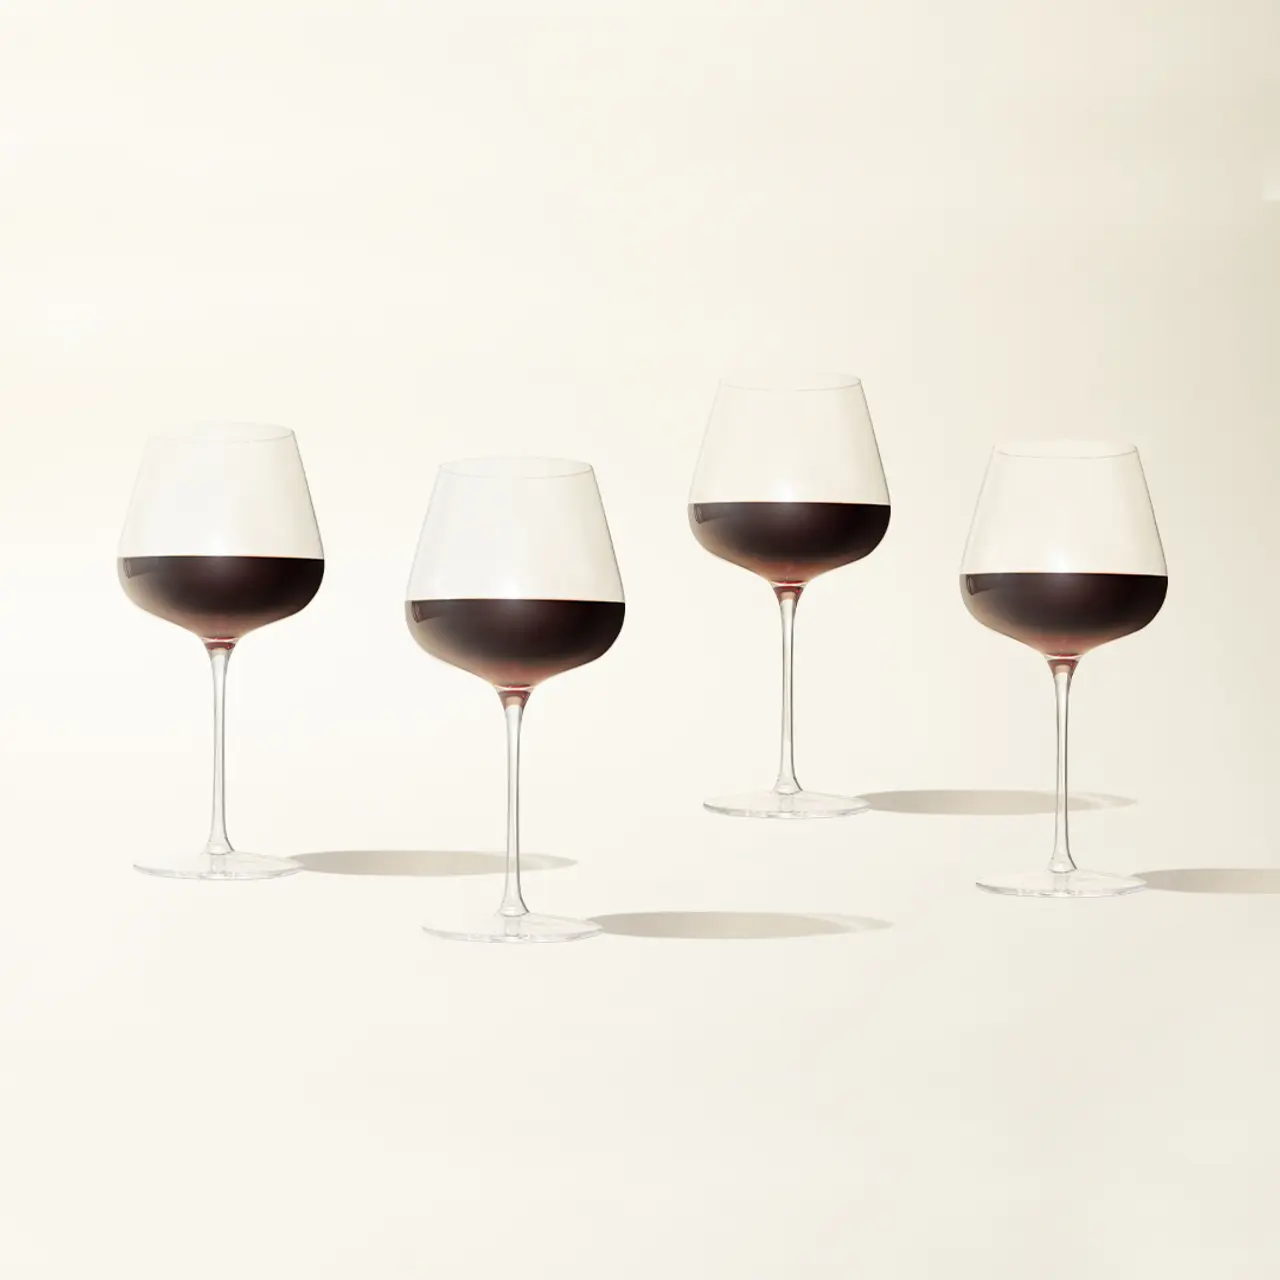 Four wine glasses with varying levels of red wine against a light background.